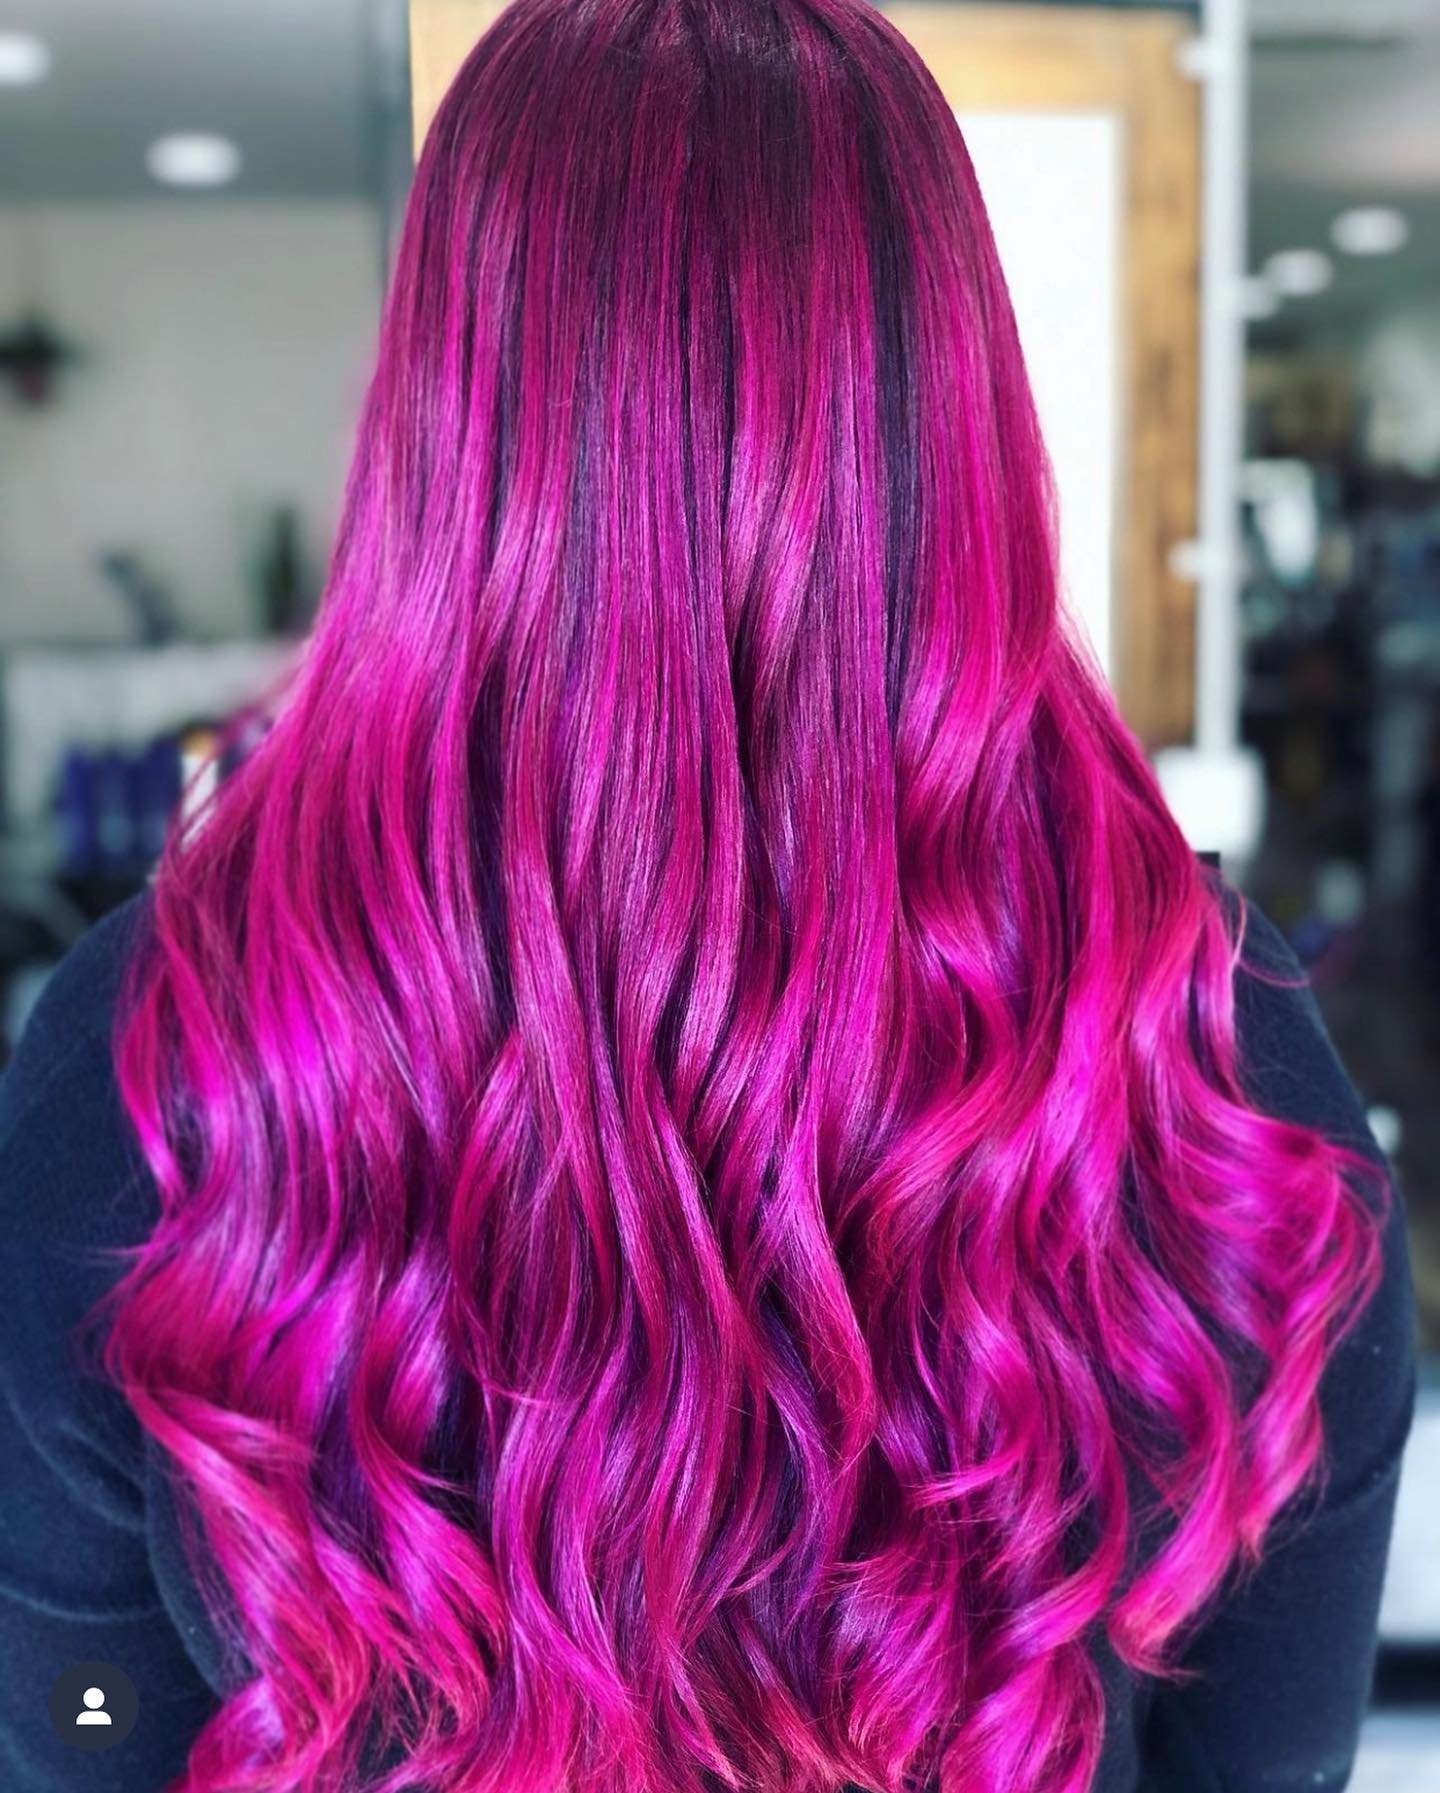 some festive favorites in honor of Valentines day❣️💕✨

.
.
.
#hair #haircolor #balayage #red #pink #pinkhair #valentine #valentinesday #redhair#fantasyhair #vivdhaircolor #pulpriot #balayagehighlights #babylights #dimension #highlights #balayagehair